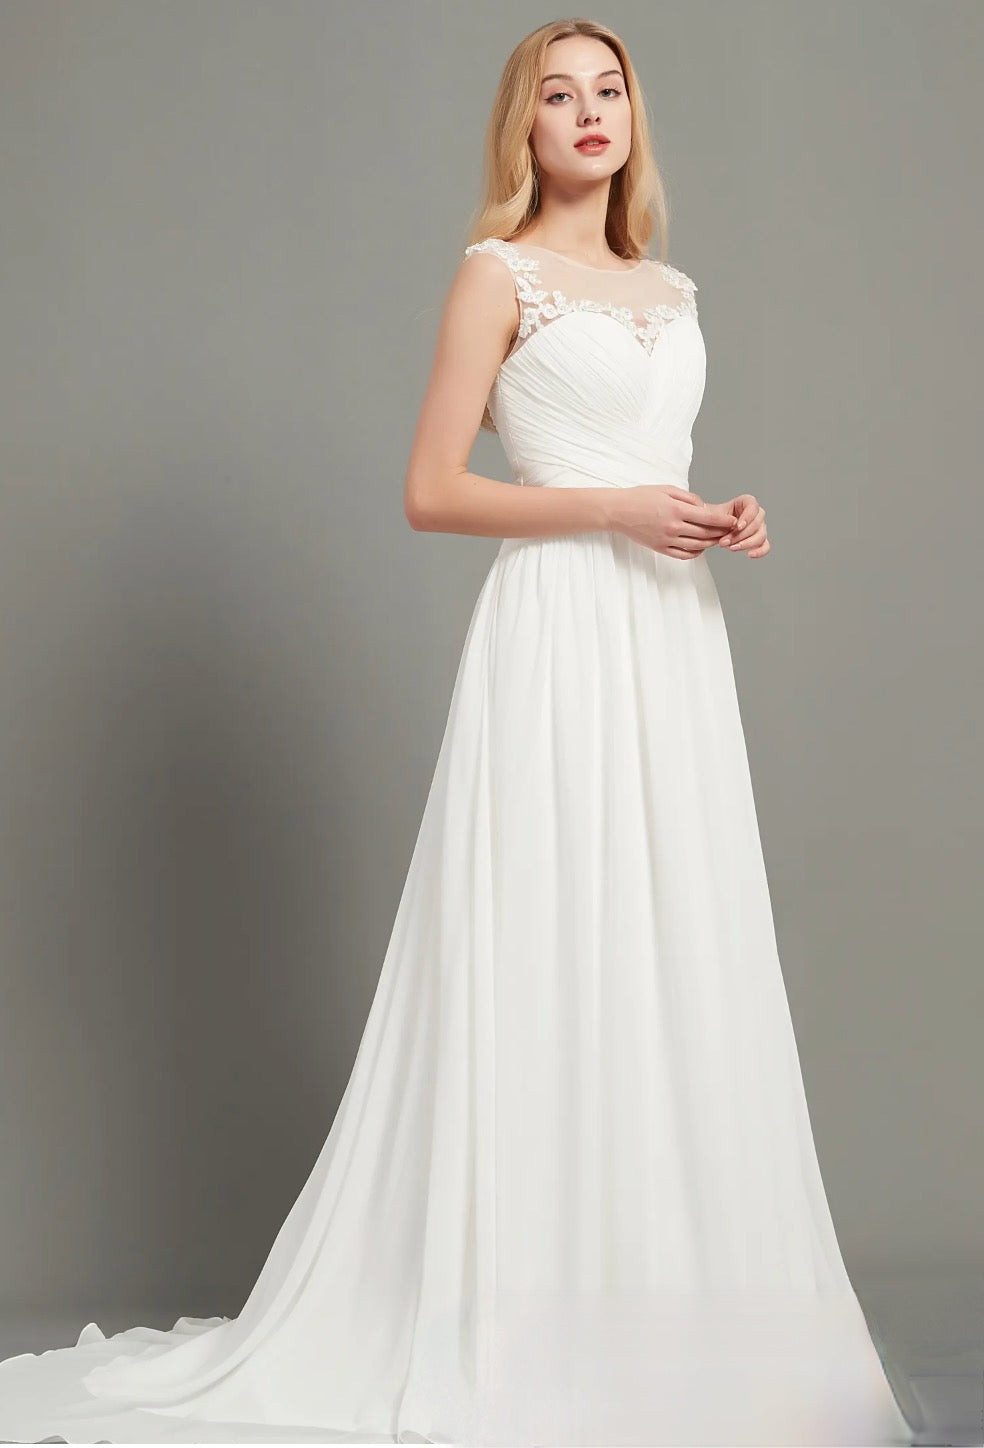 A-line Chic Strapless Ivory Simple Wedding Dress Bridal Gown QW2110 – SQOSA